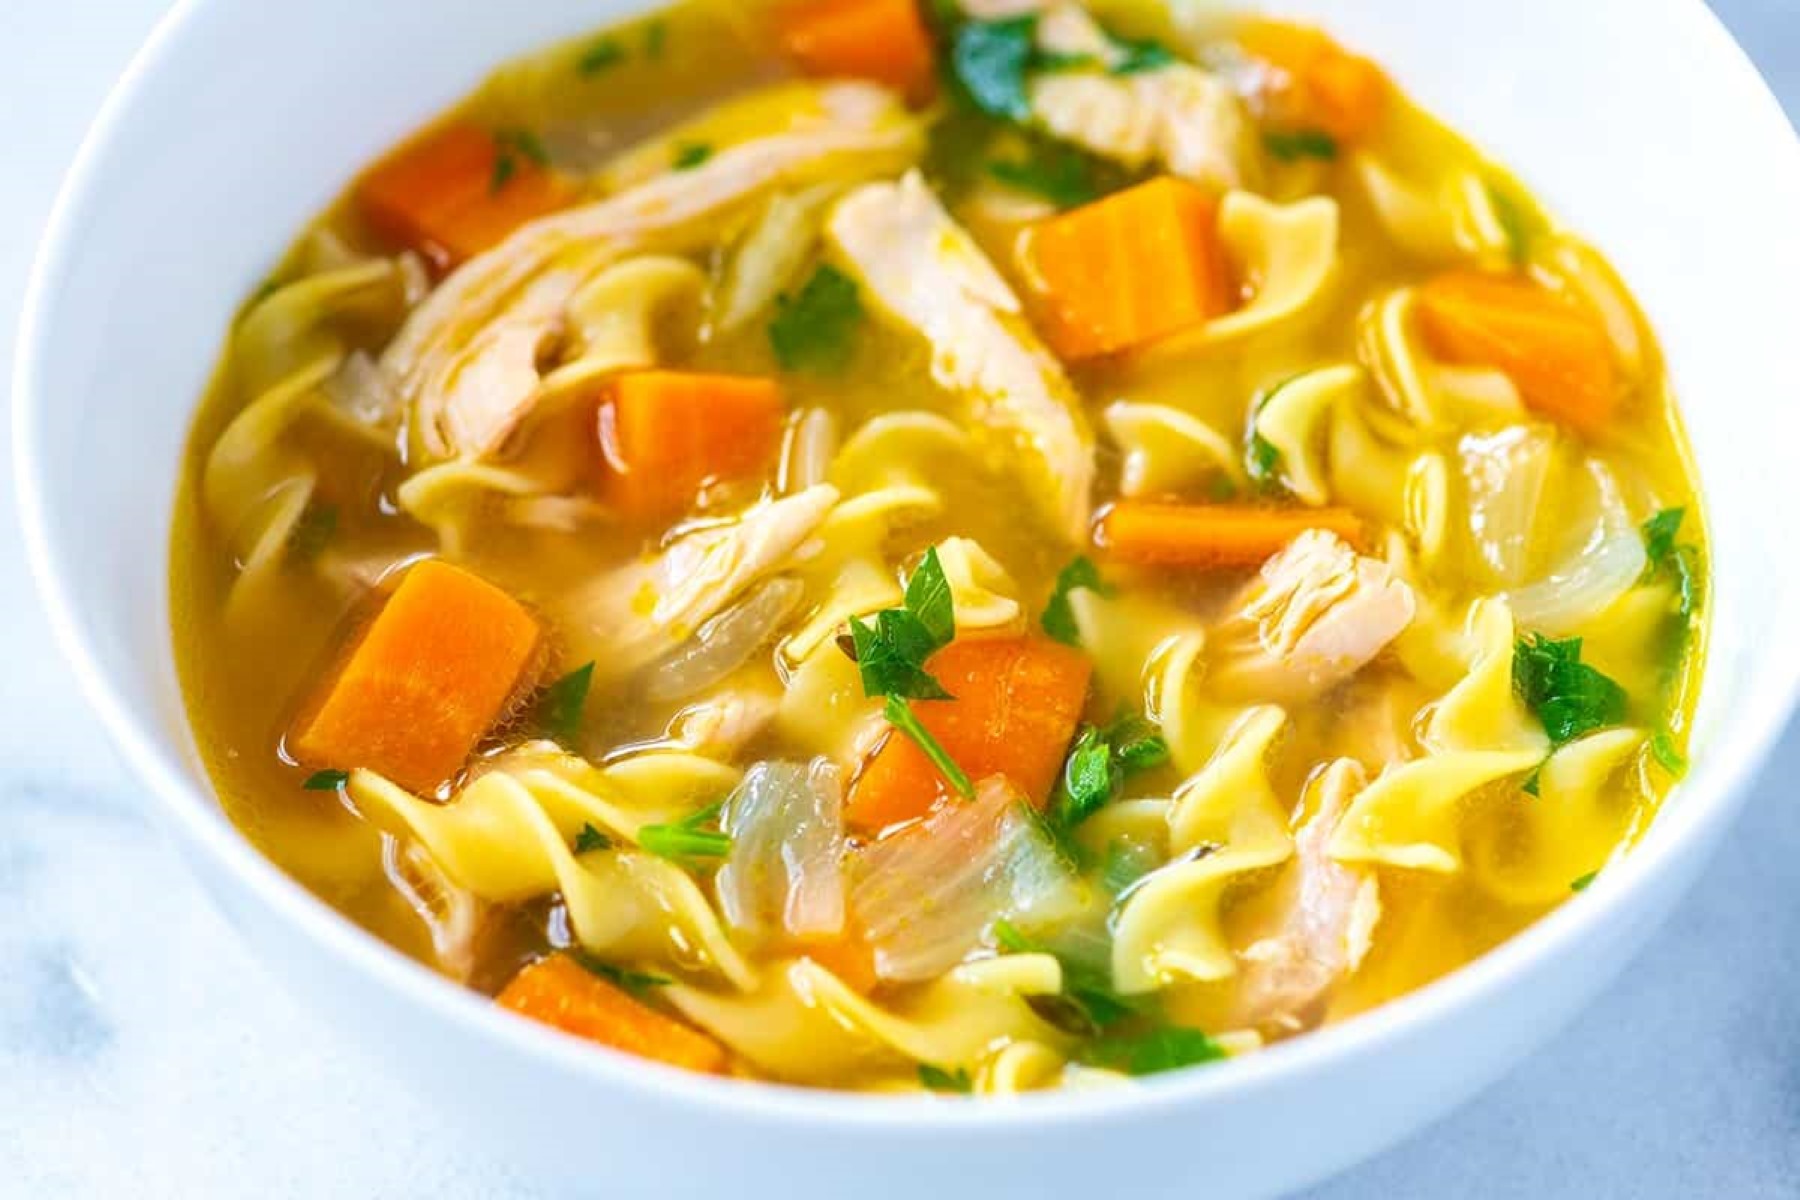 How To Store Chicken Noodle Soup